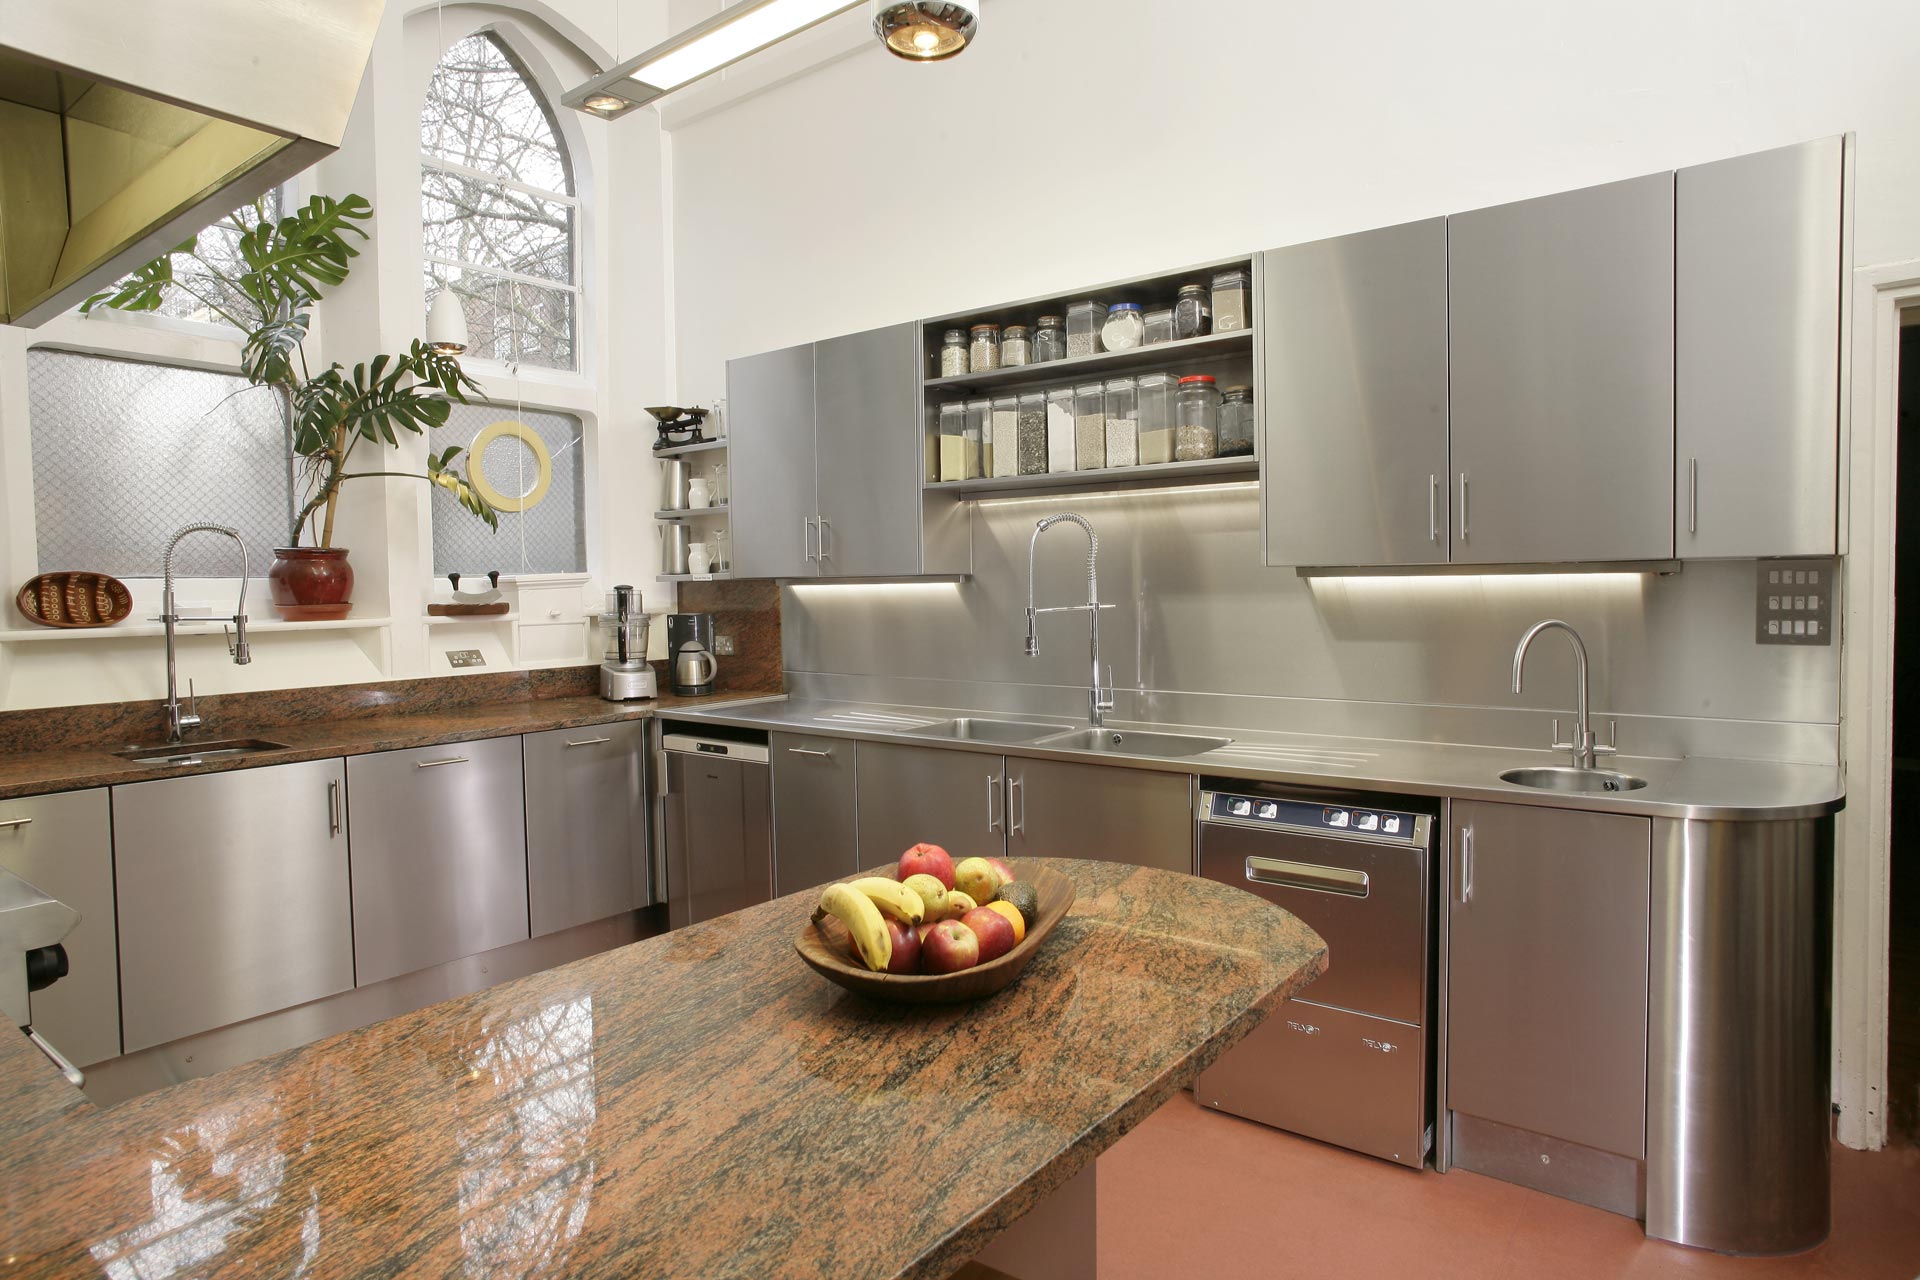 Residential & Domestic - Nelson Bespoke Commercial Kitchens